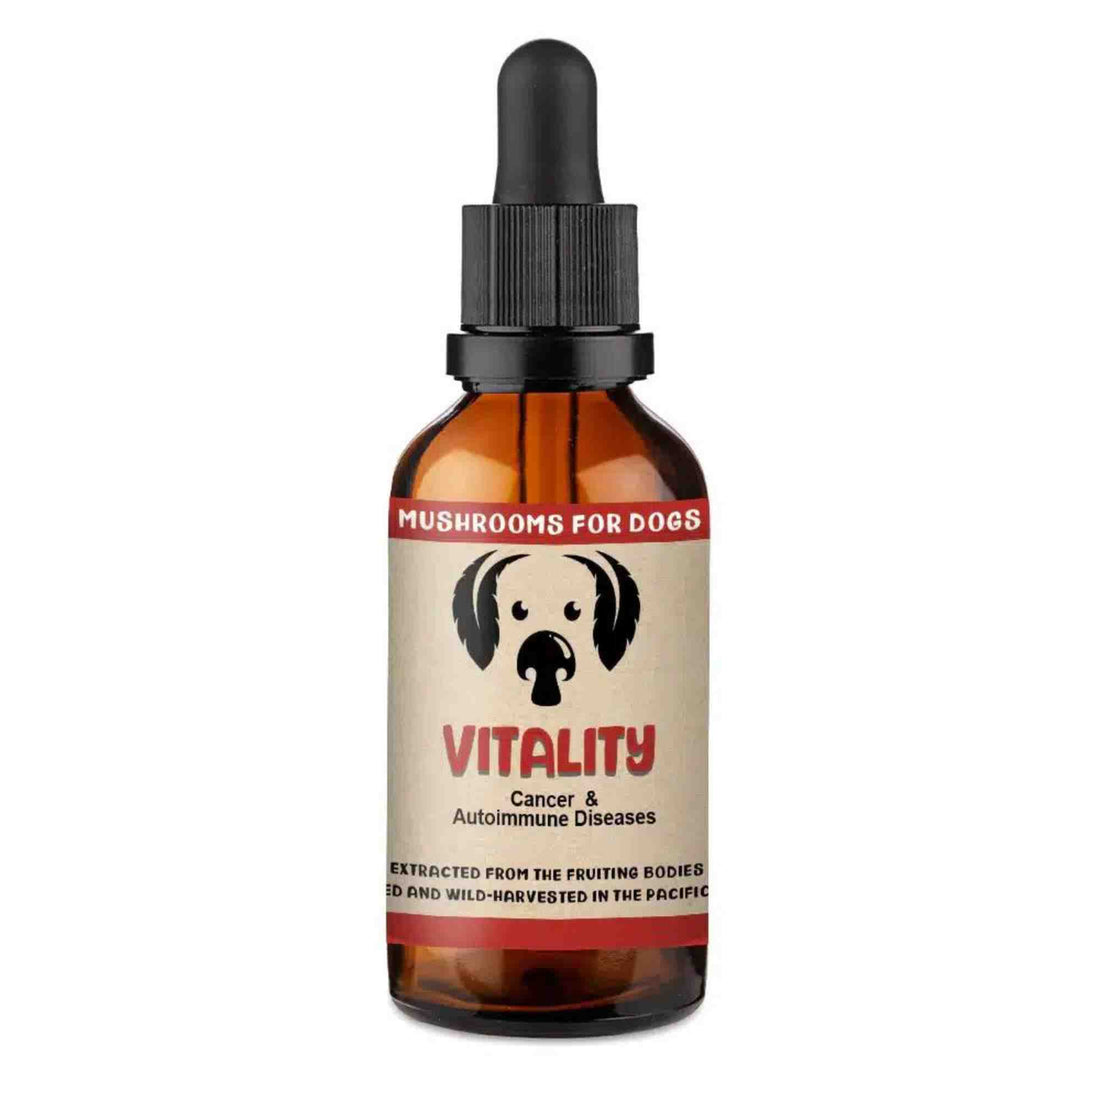 Vitality - Mushrooms for Cancer and Autoimmune Diseases - front of bottle by Mycodog